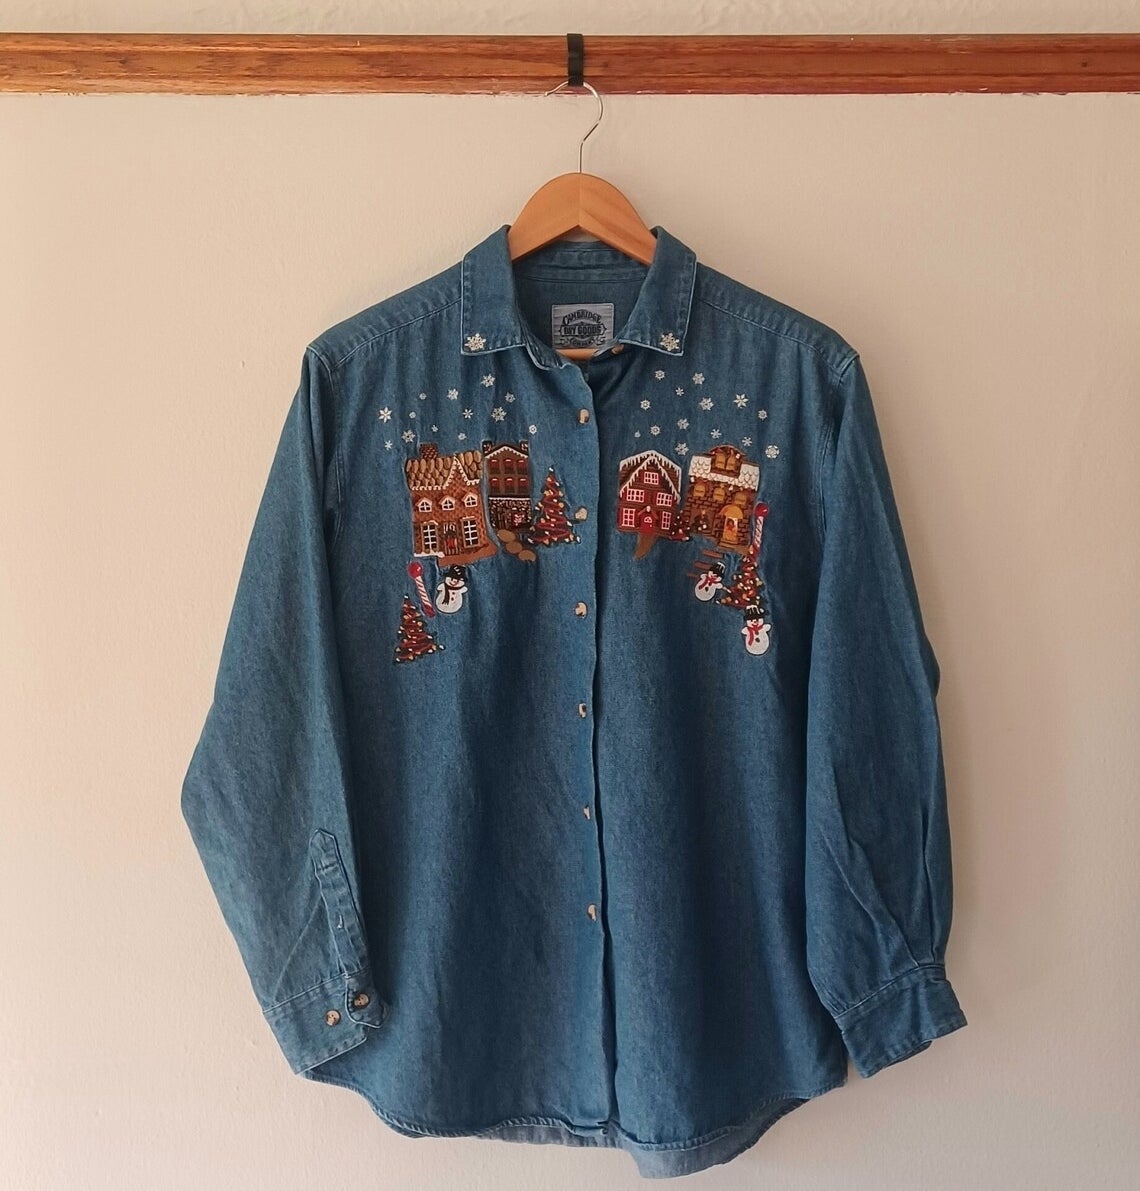 A denim shirt with Xmas embroidery